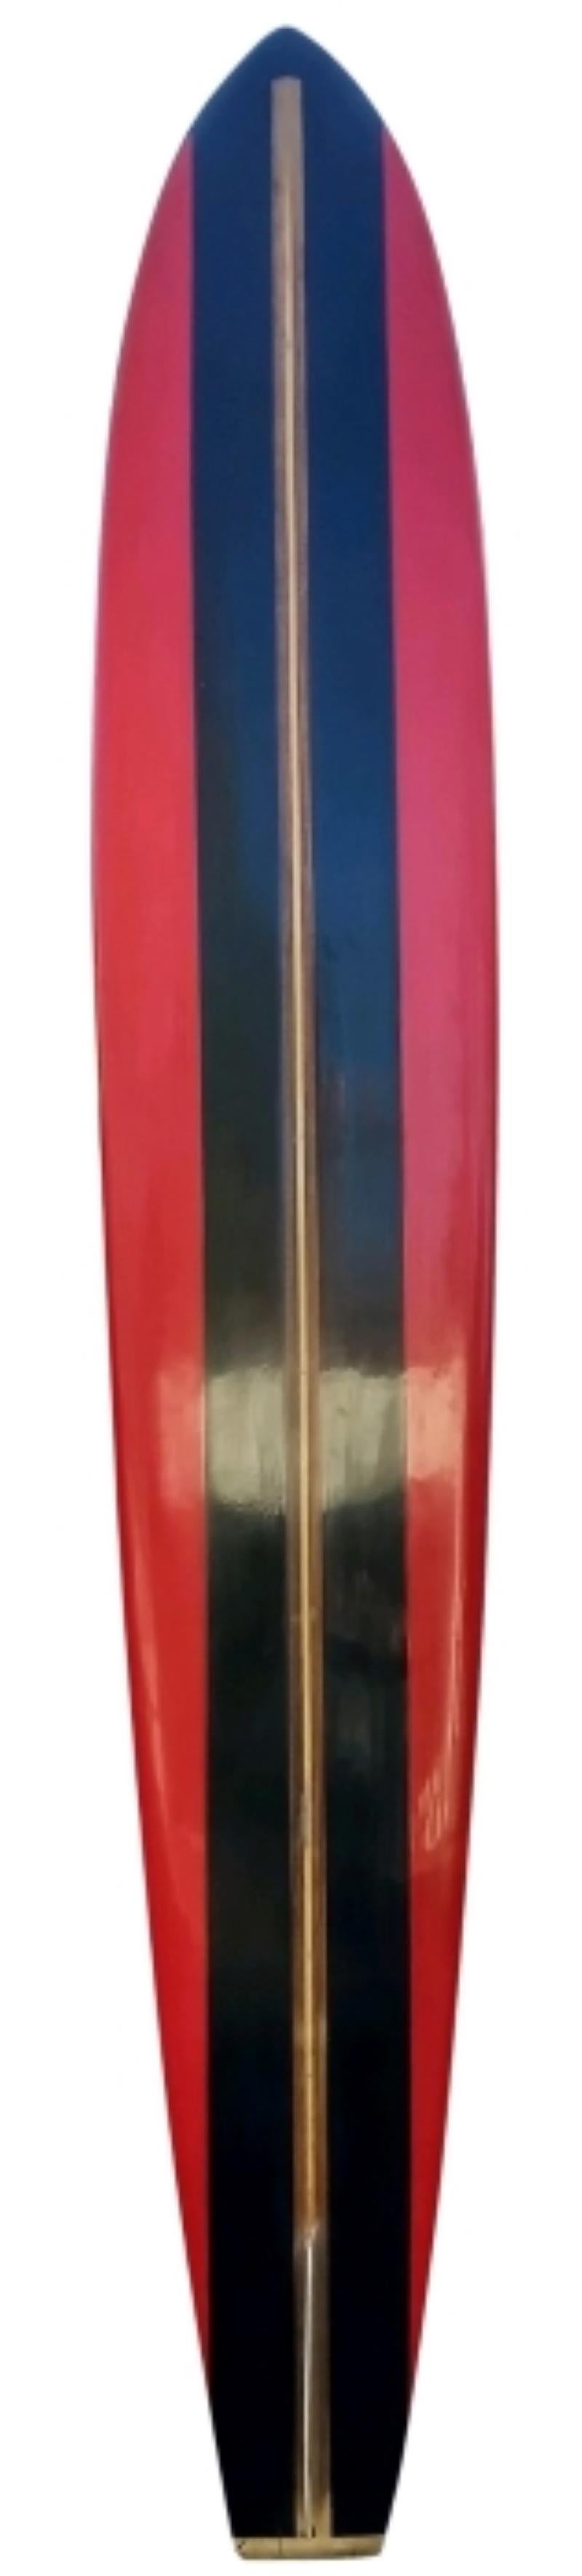 1963 Hansen Surfboards Waimea Bay big wave surfboard. Features black panels with red rails, redwood/balsawood t-band stringer, and unique low-profile single fin. This surfboard was built to ride the biggest waves in Hawaii, at the infamous big wave